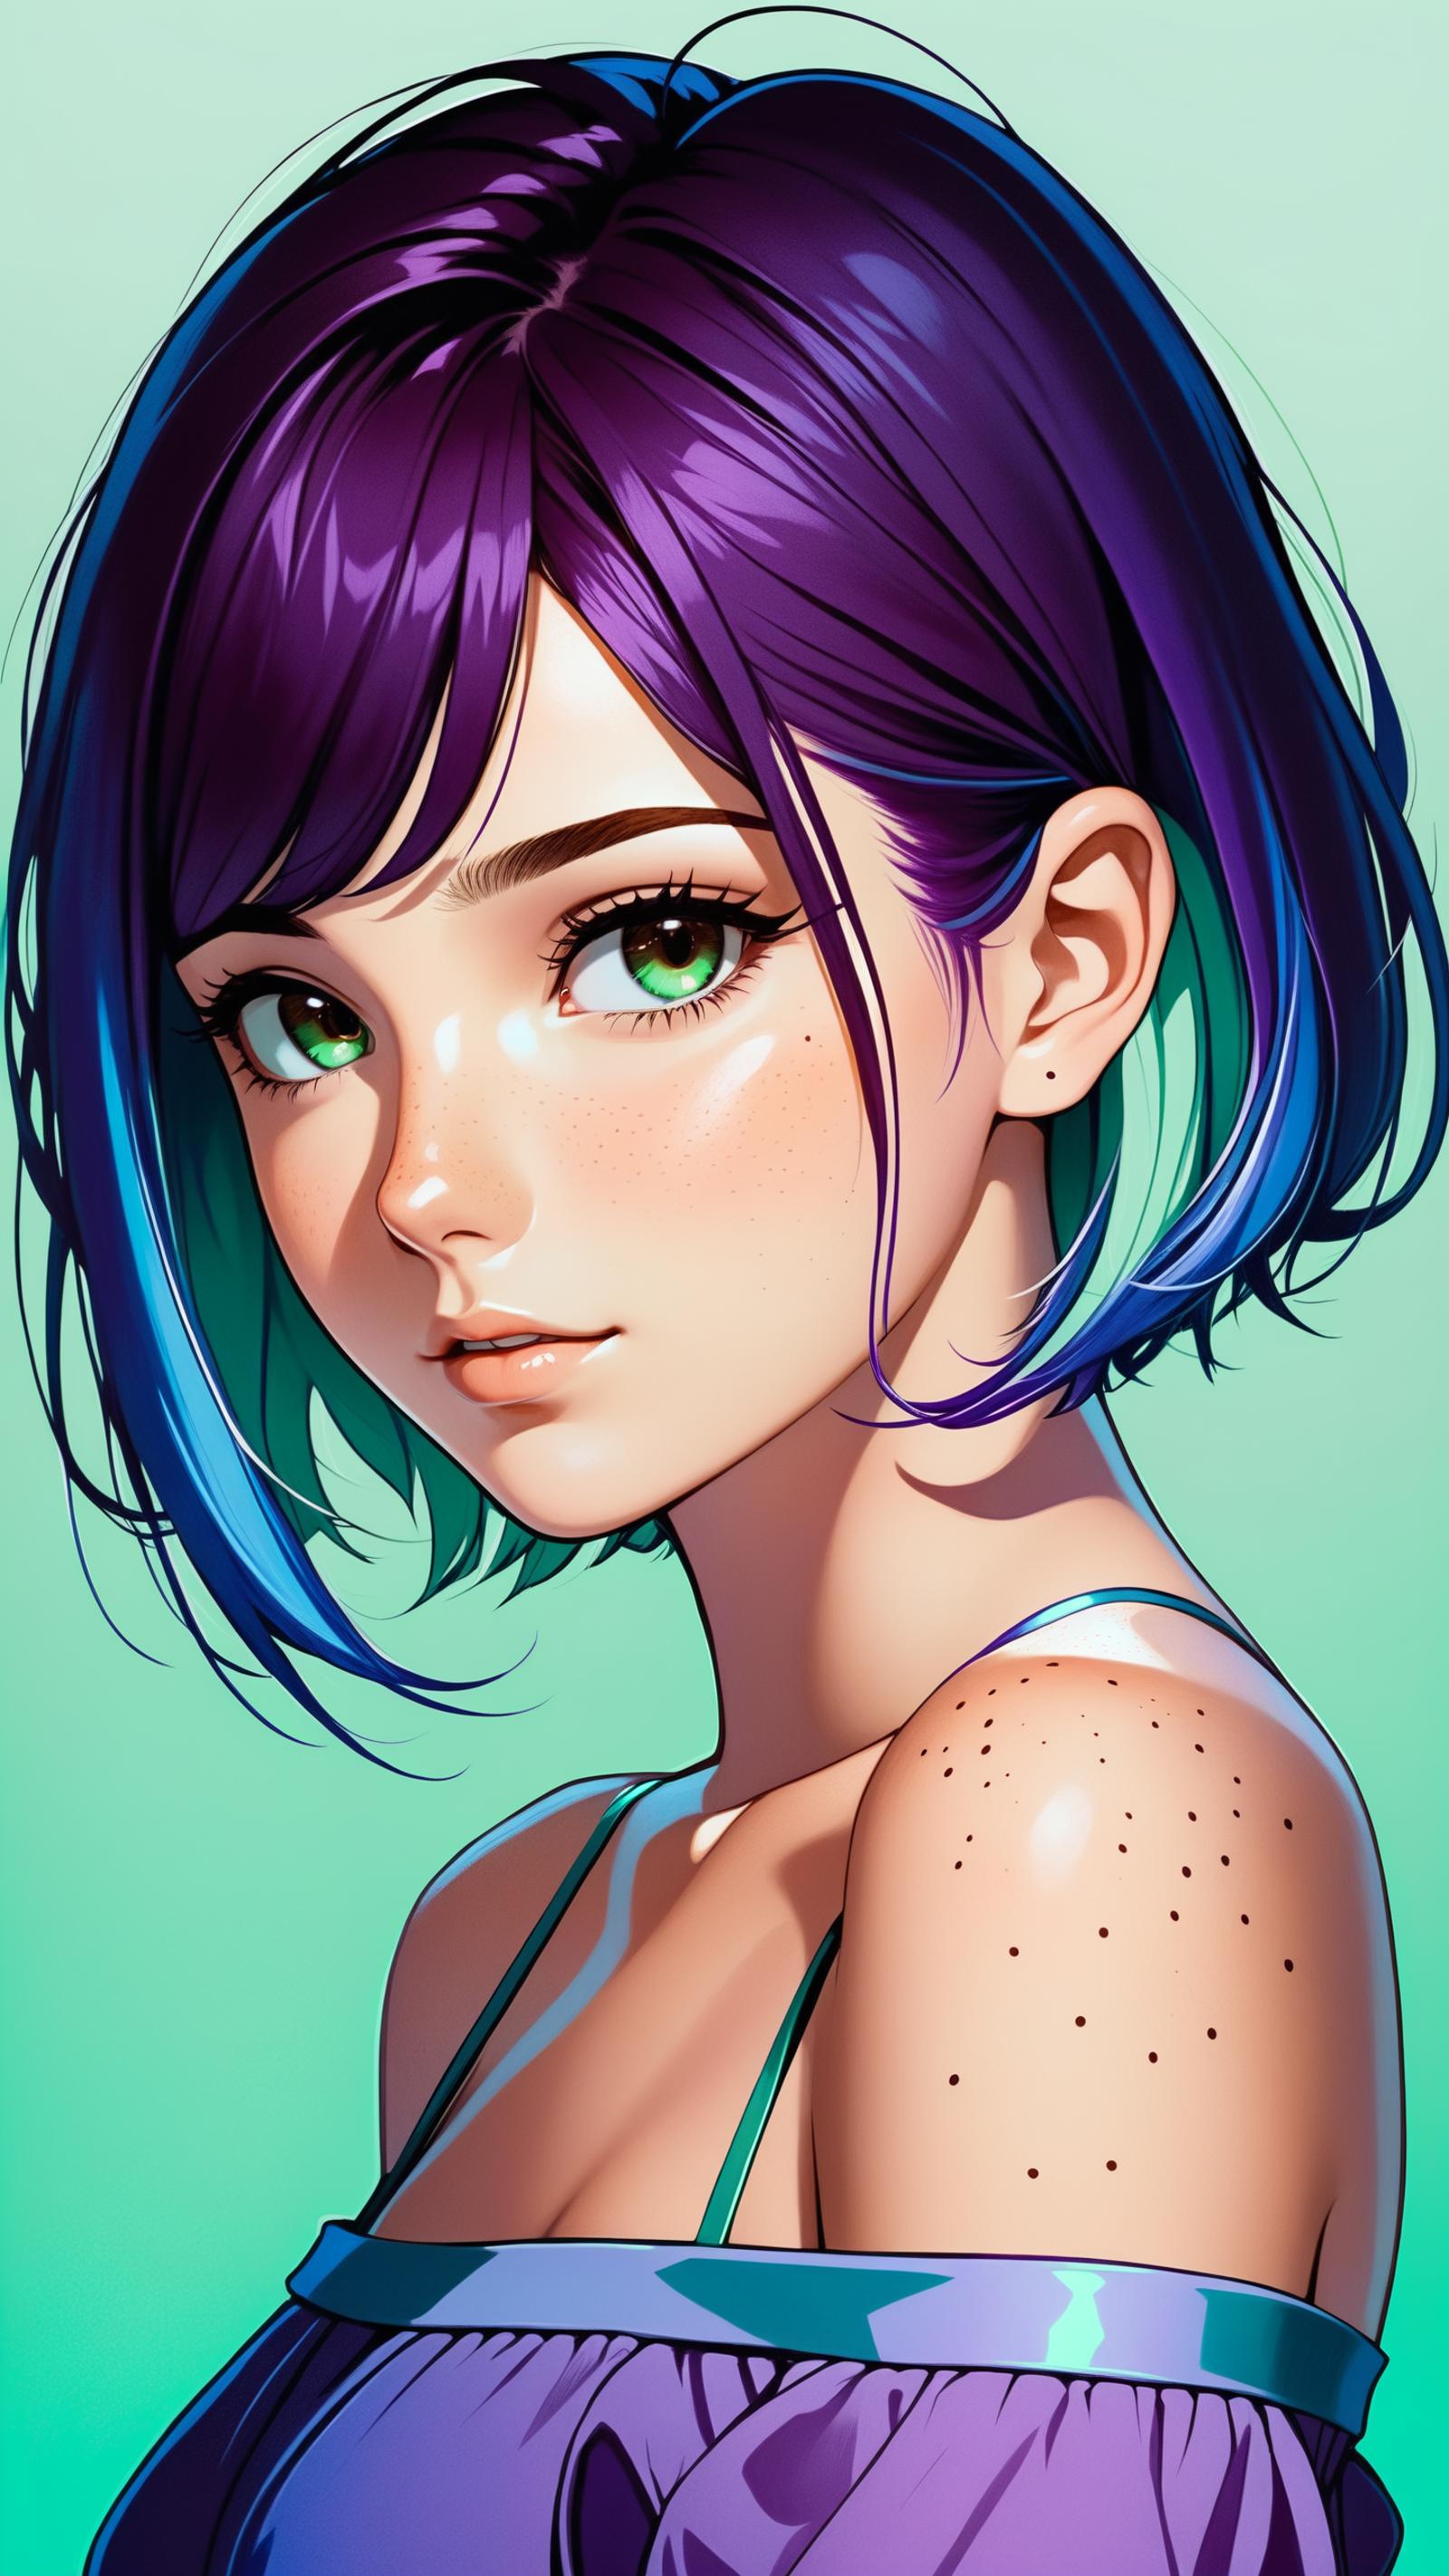 A digital illustration of a young woman with purple hair and green eyes.